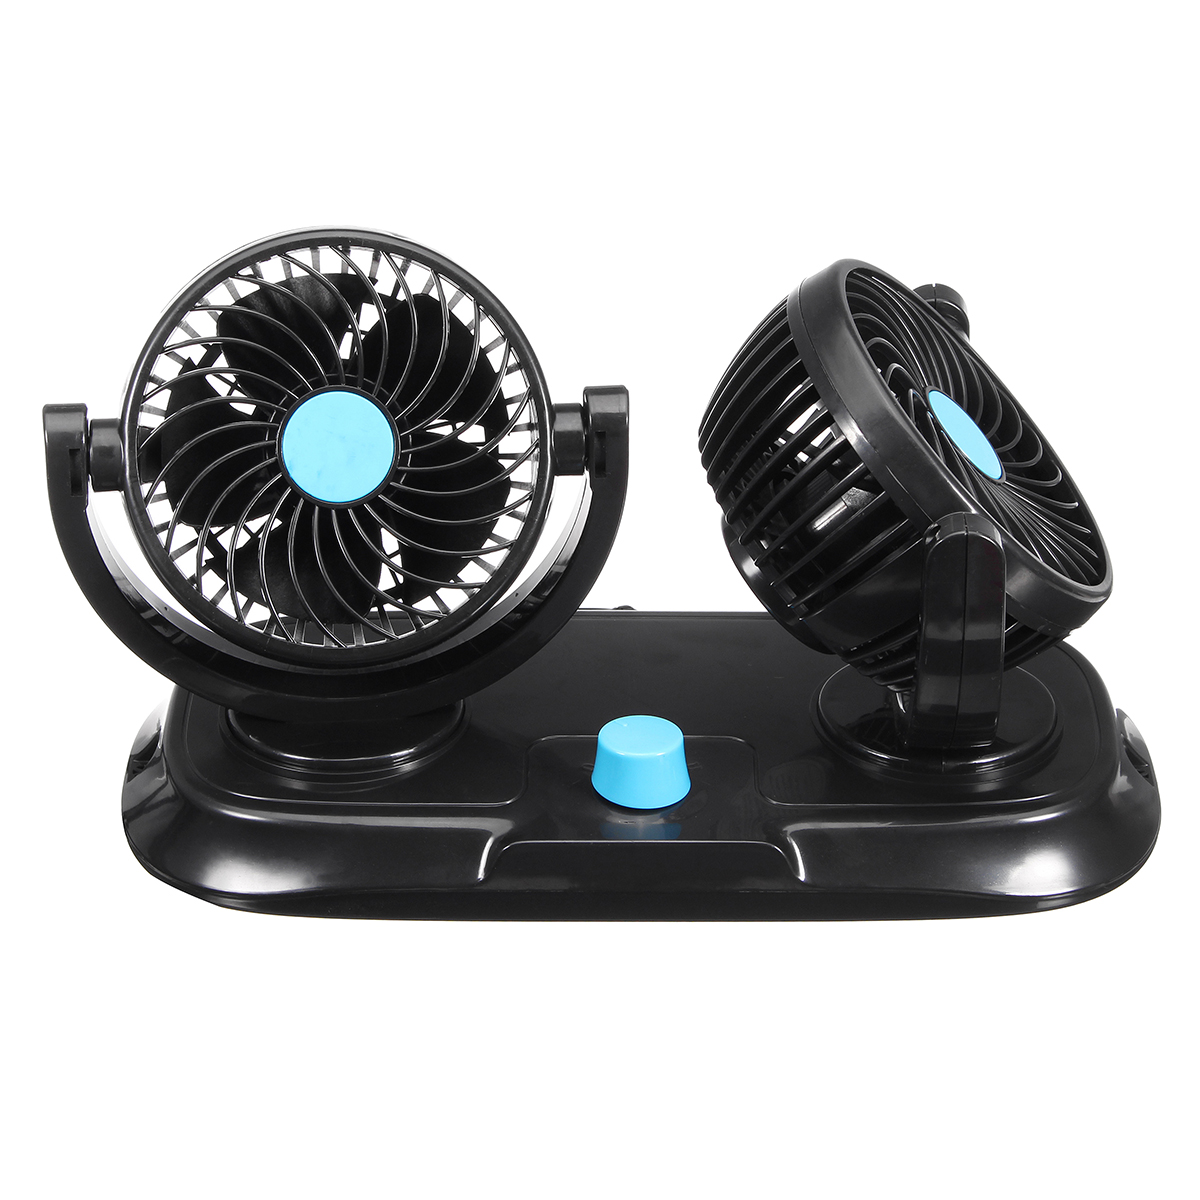 12V-Adjustable-Double-360-Degrees-Mini-Oscillating-Fan-Rotation-Cooling-Fan-Air-Conditioner-1338437-9